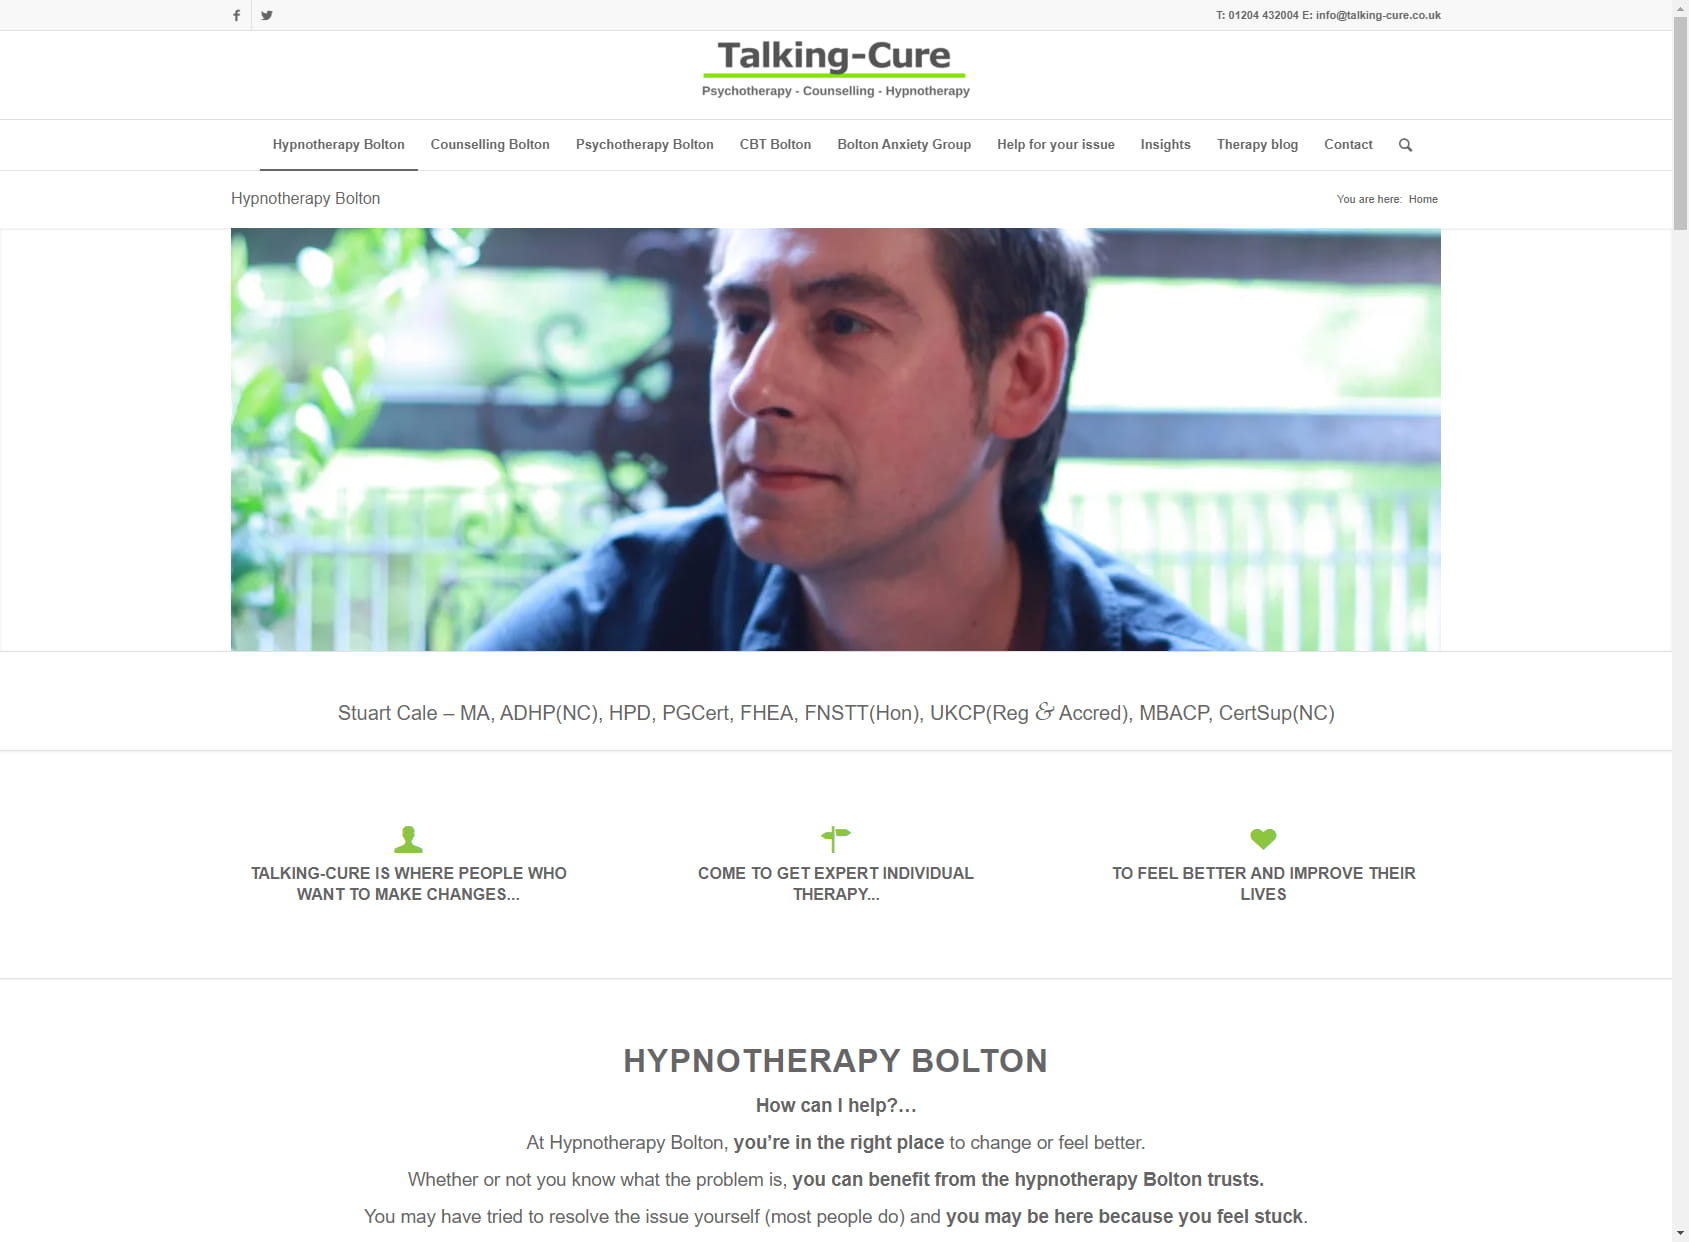 Talking-Cure Hypnotherapy Counselling Psychotherapy